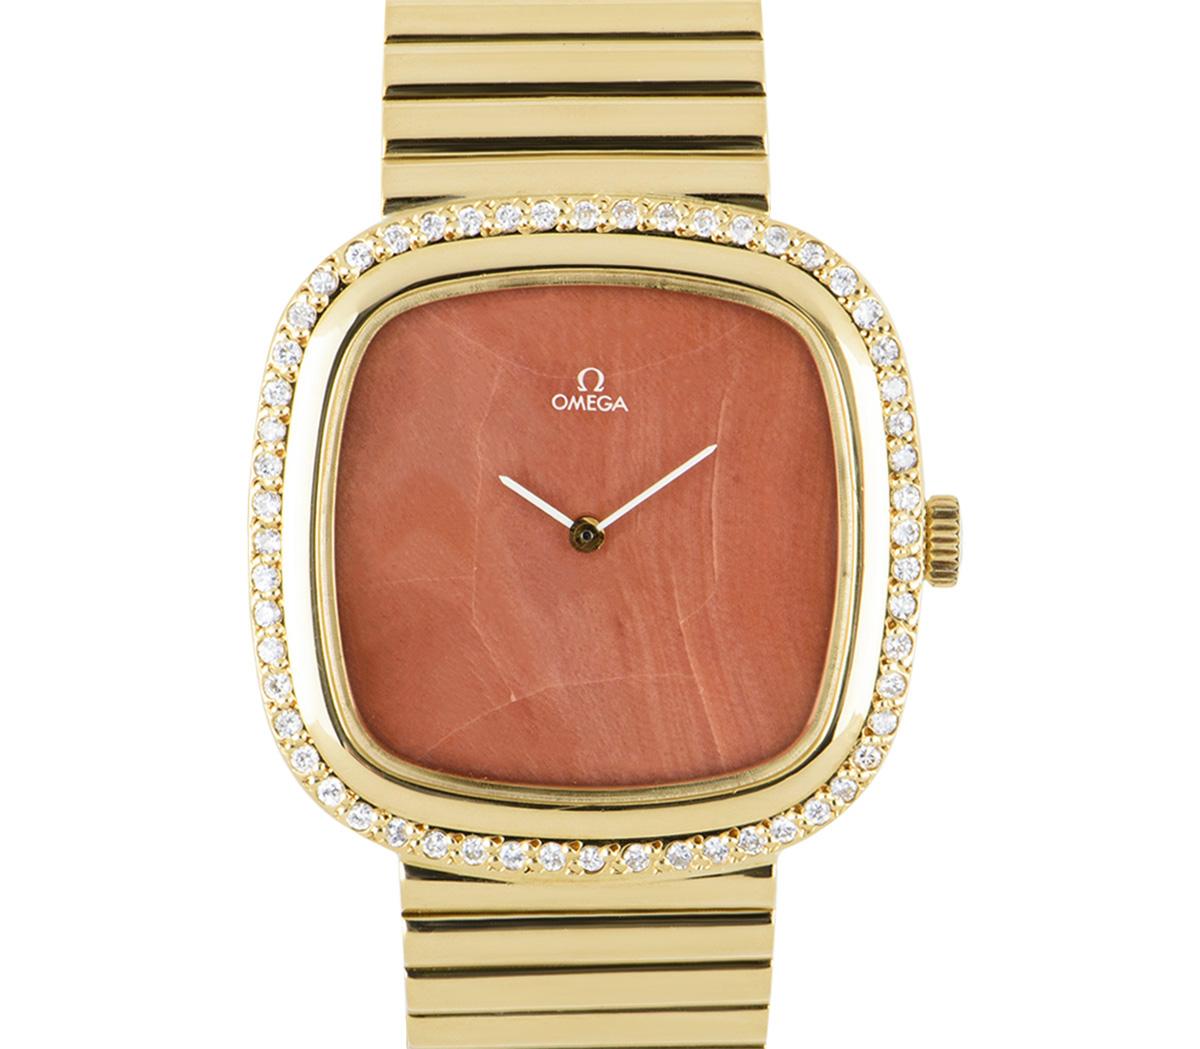 A yellow gold dress watch by Omega, featuring a rare coral stone dial; by far the hardest of the natural stone dials to come by (please note the dial is cracked which is reflected in the price). The bezel is set with 56 round brilliant cut diamonds.